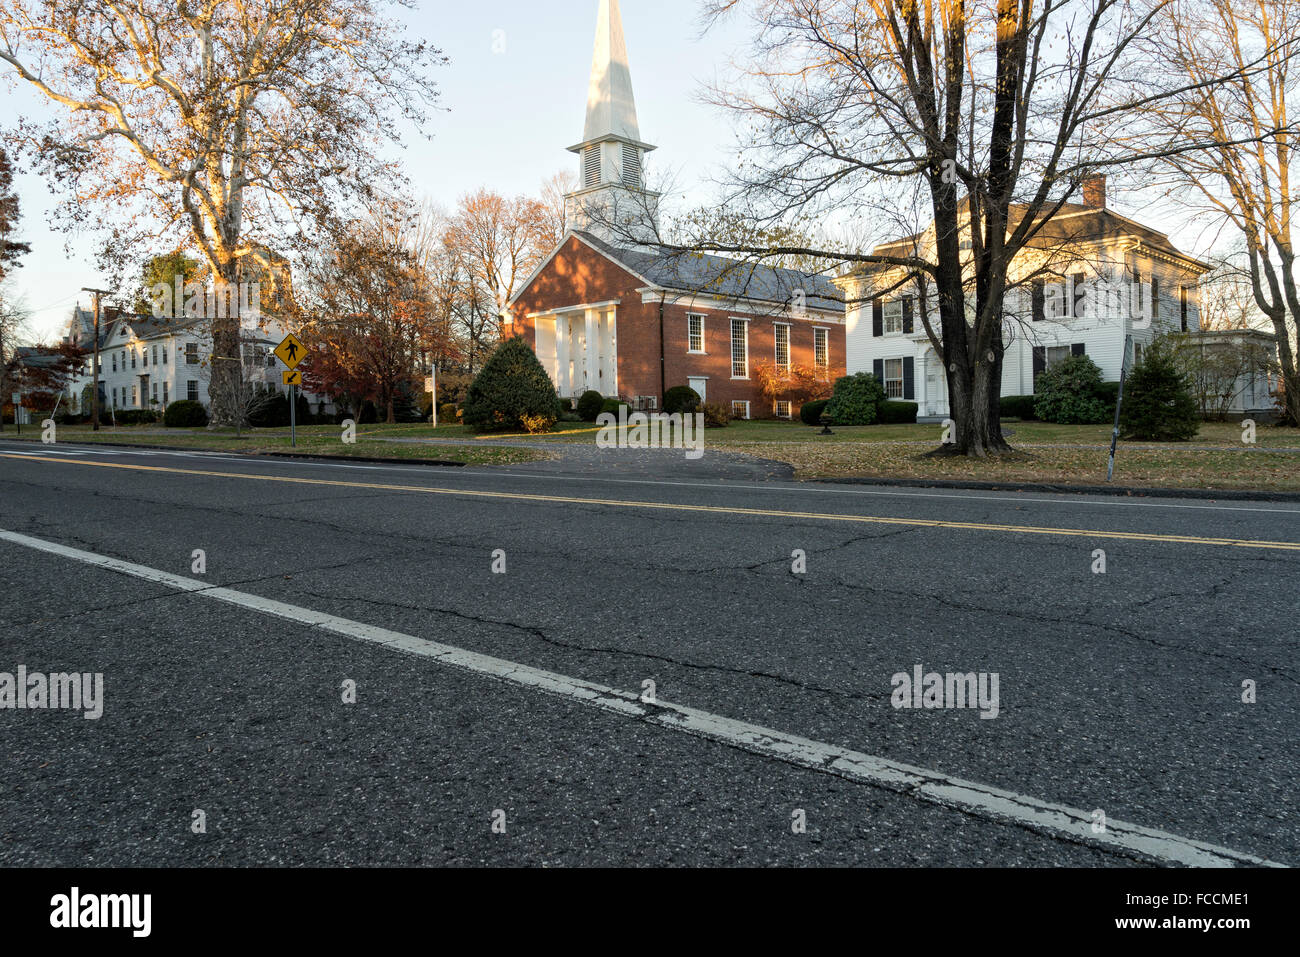 Stately HIstoric Home on the Main Street of Litchfield, CT. Next to a traditional country church with a steeple. Stock Photo